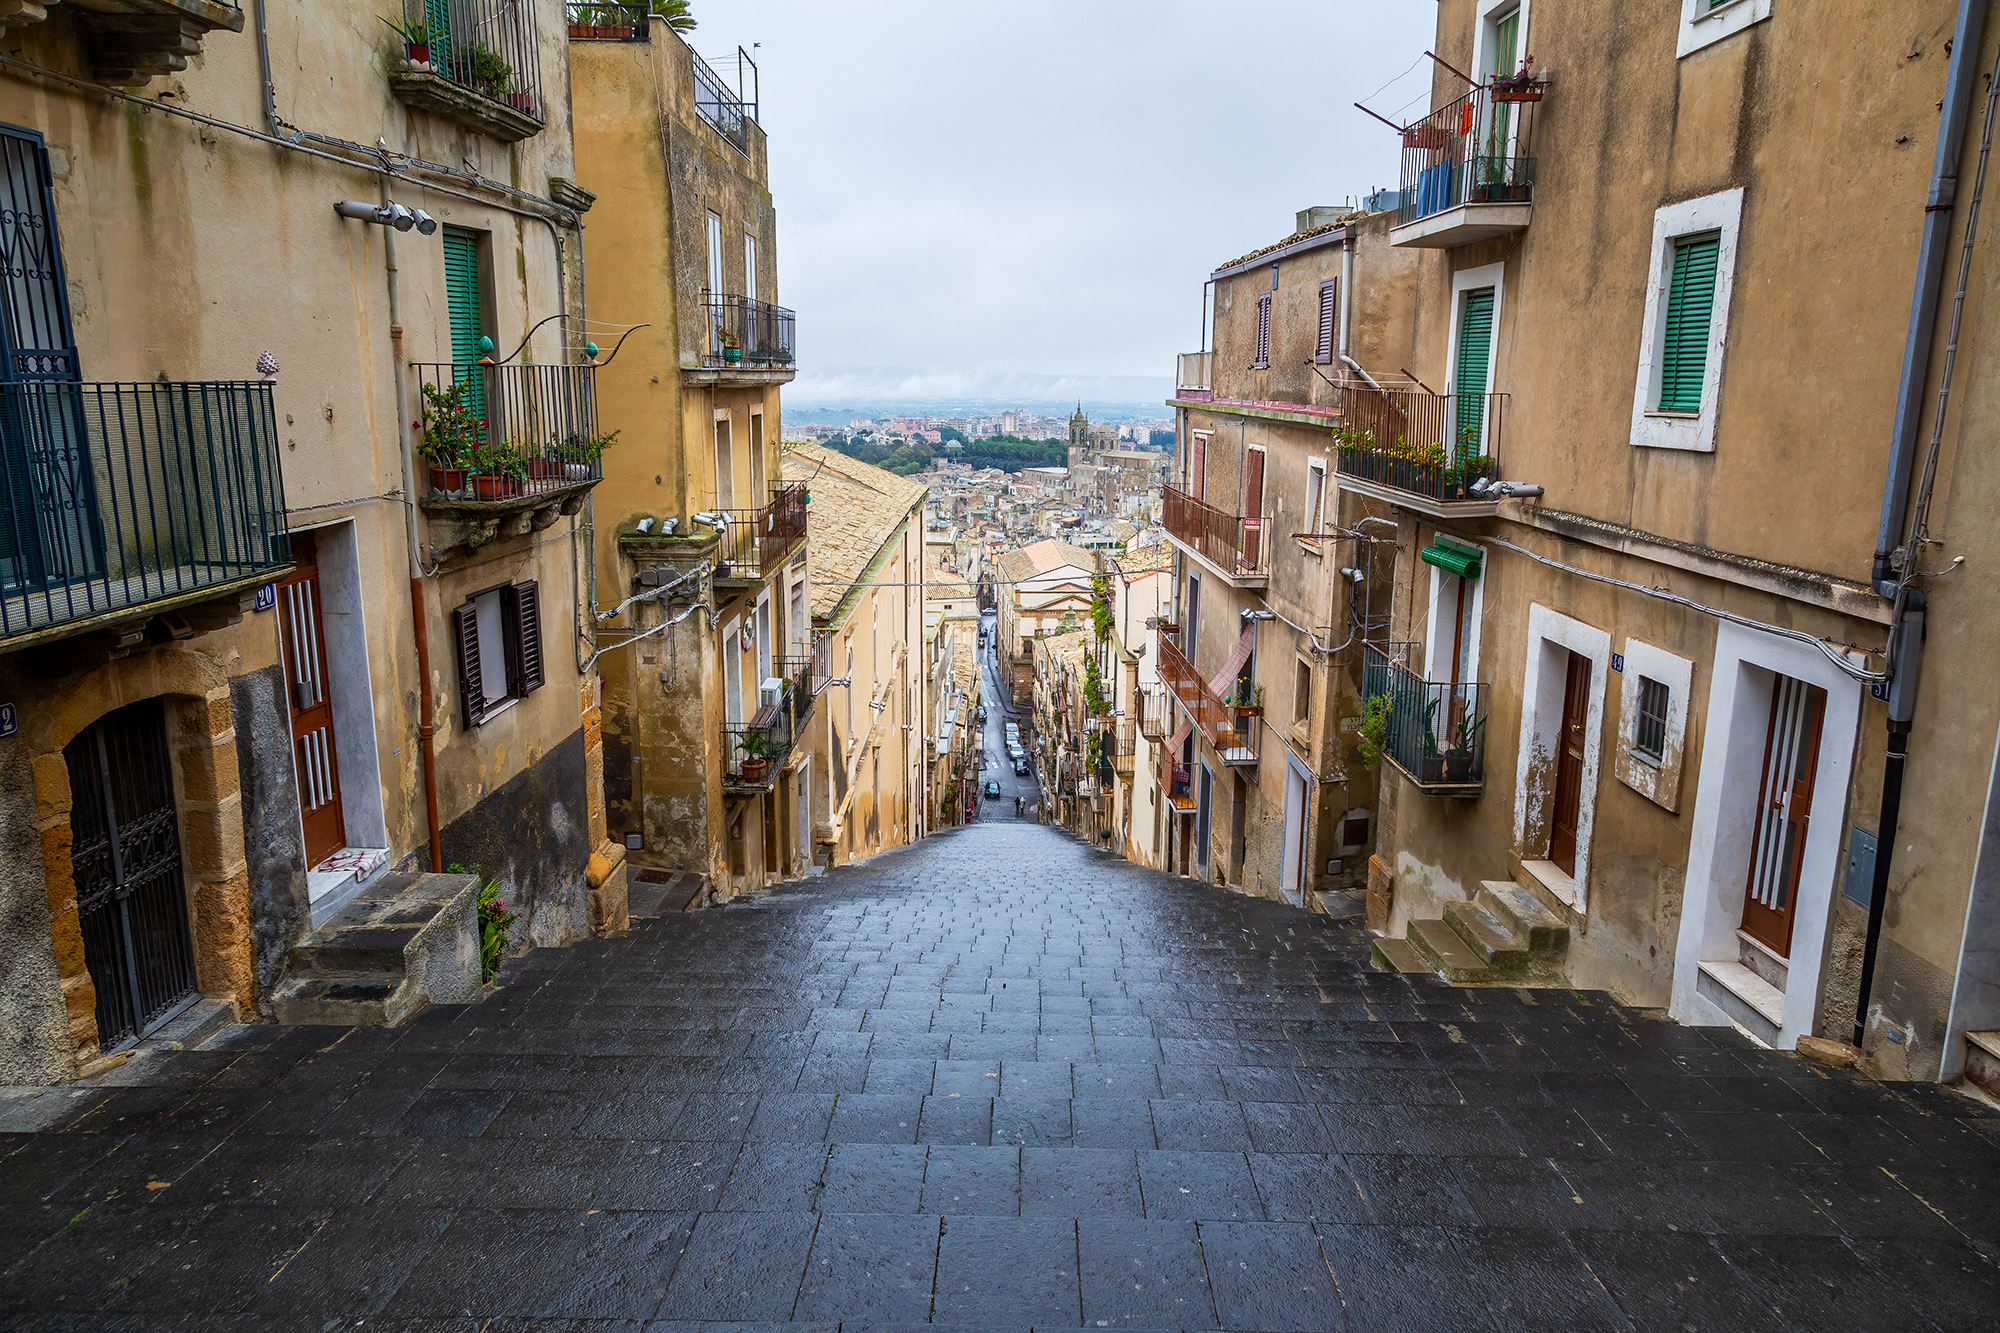 This photograph, taken in the picturesque town of Caltagirone, Sicily, Italy, offers a captivating perspective. From a high vantage...